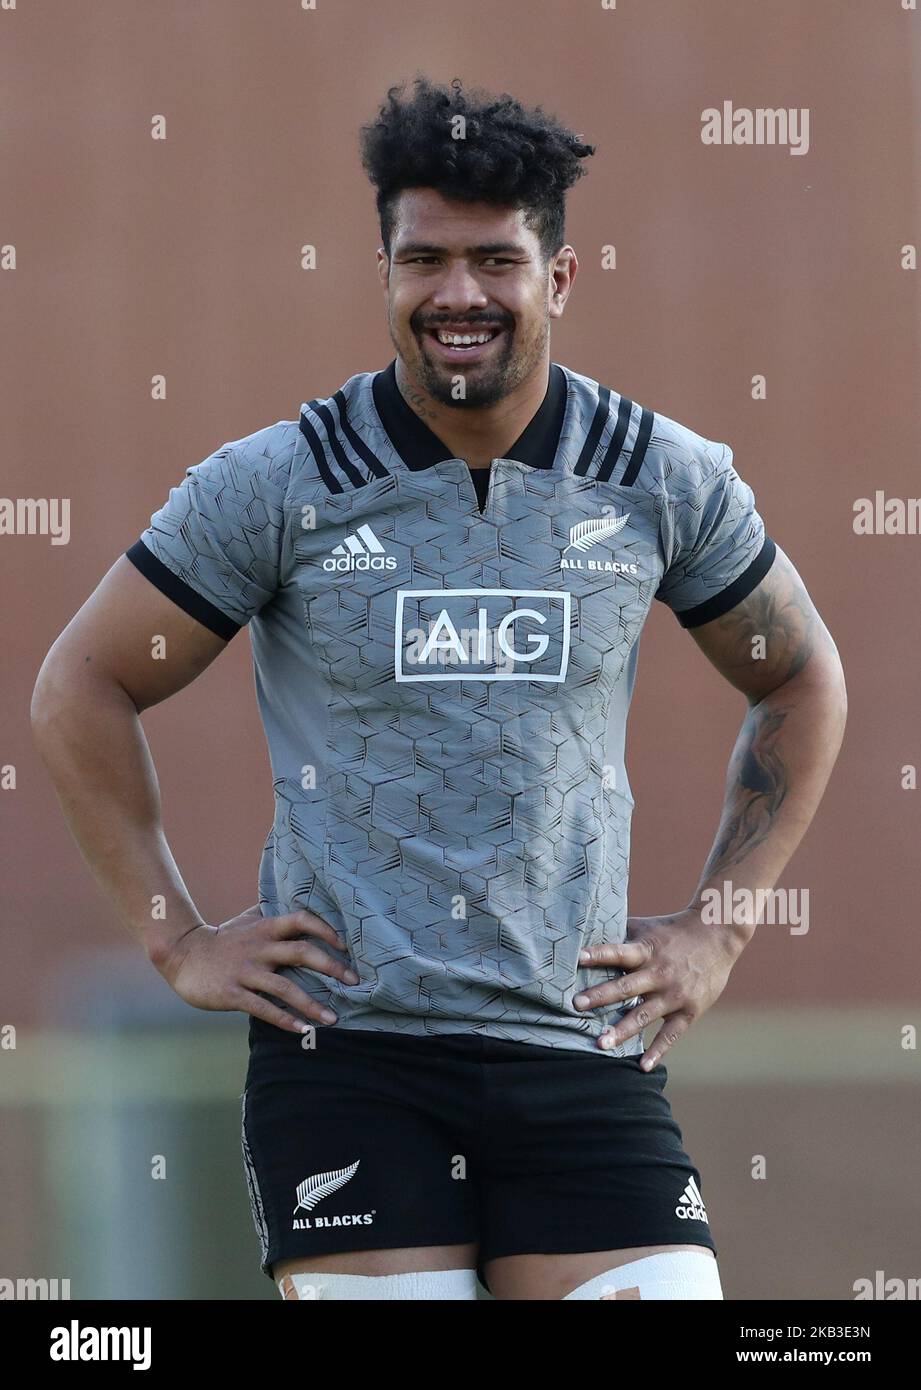 All blacks rugby jersey hi-res stock photography and images - Alamy